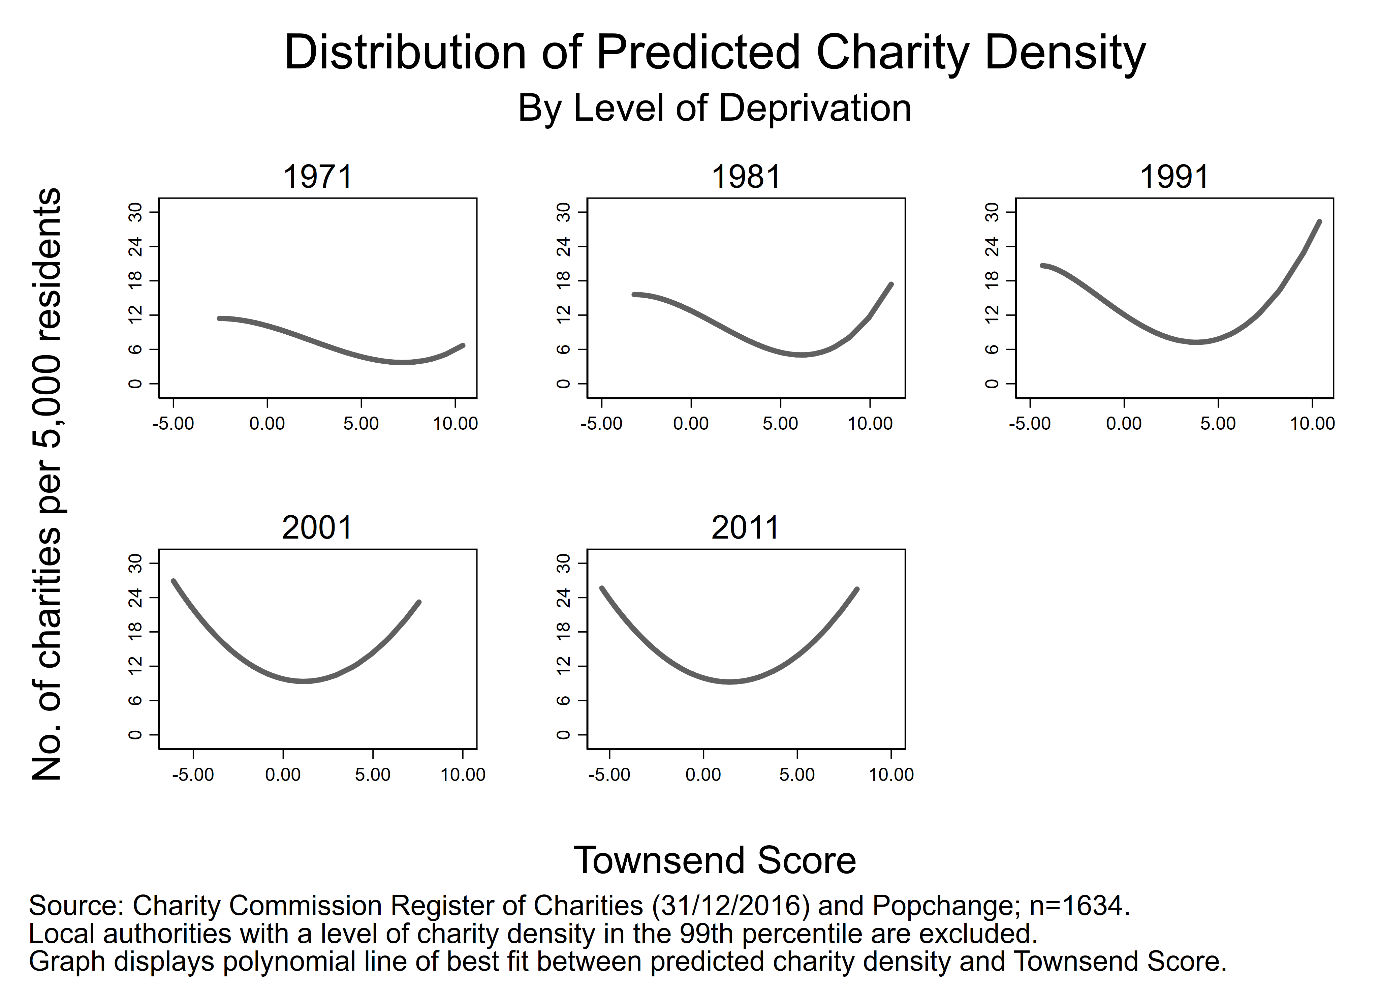 Charity Density and Deprivation